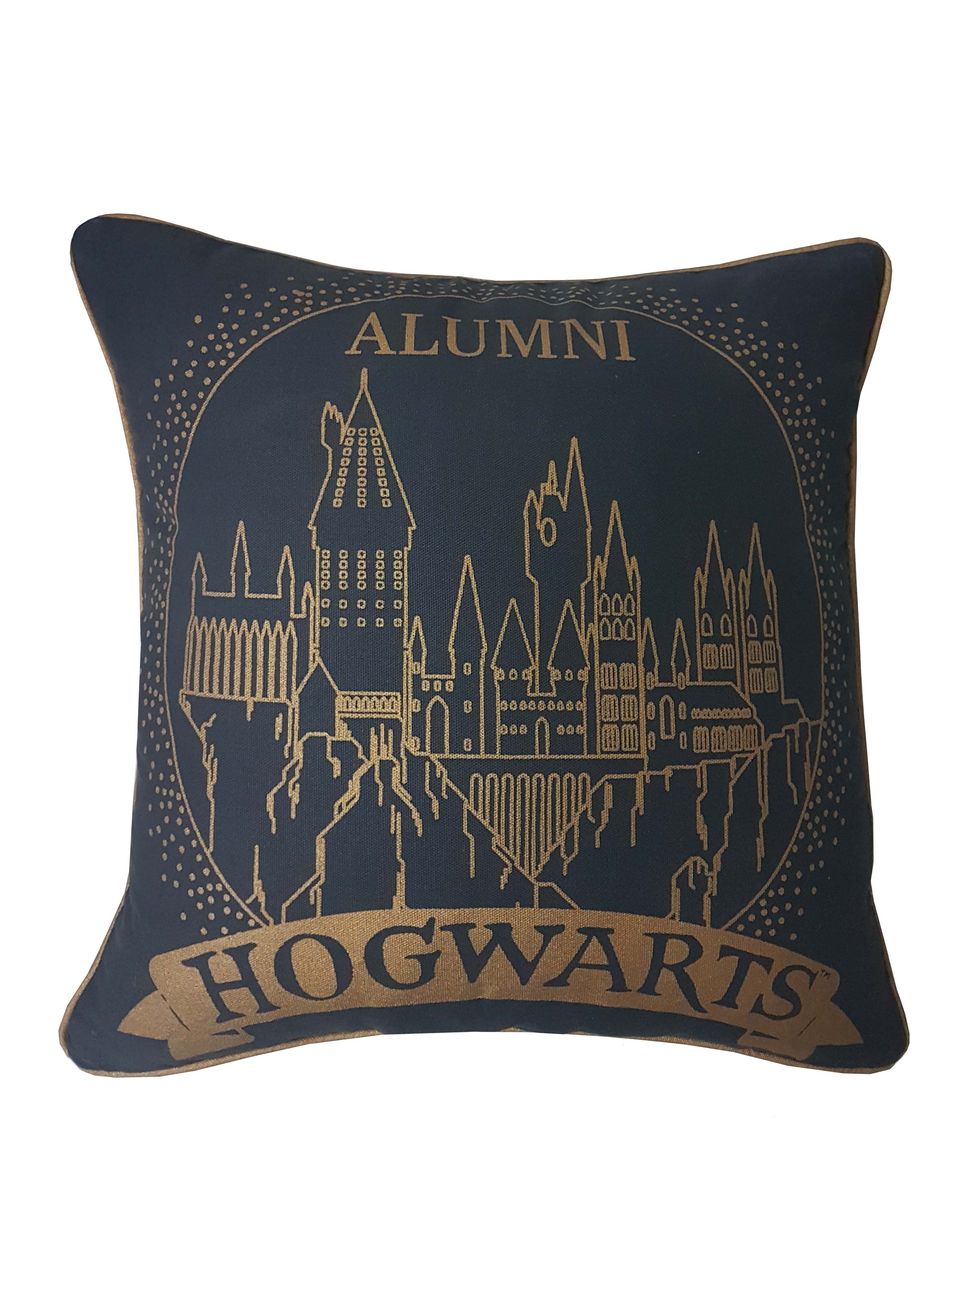 Primark has launched a Harry Potter collection and it is magical